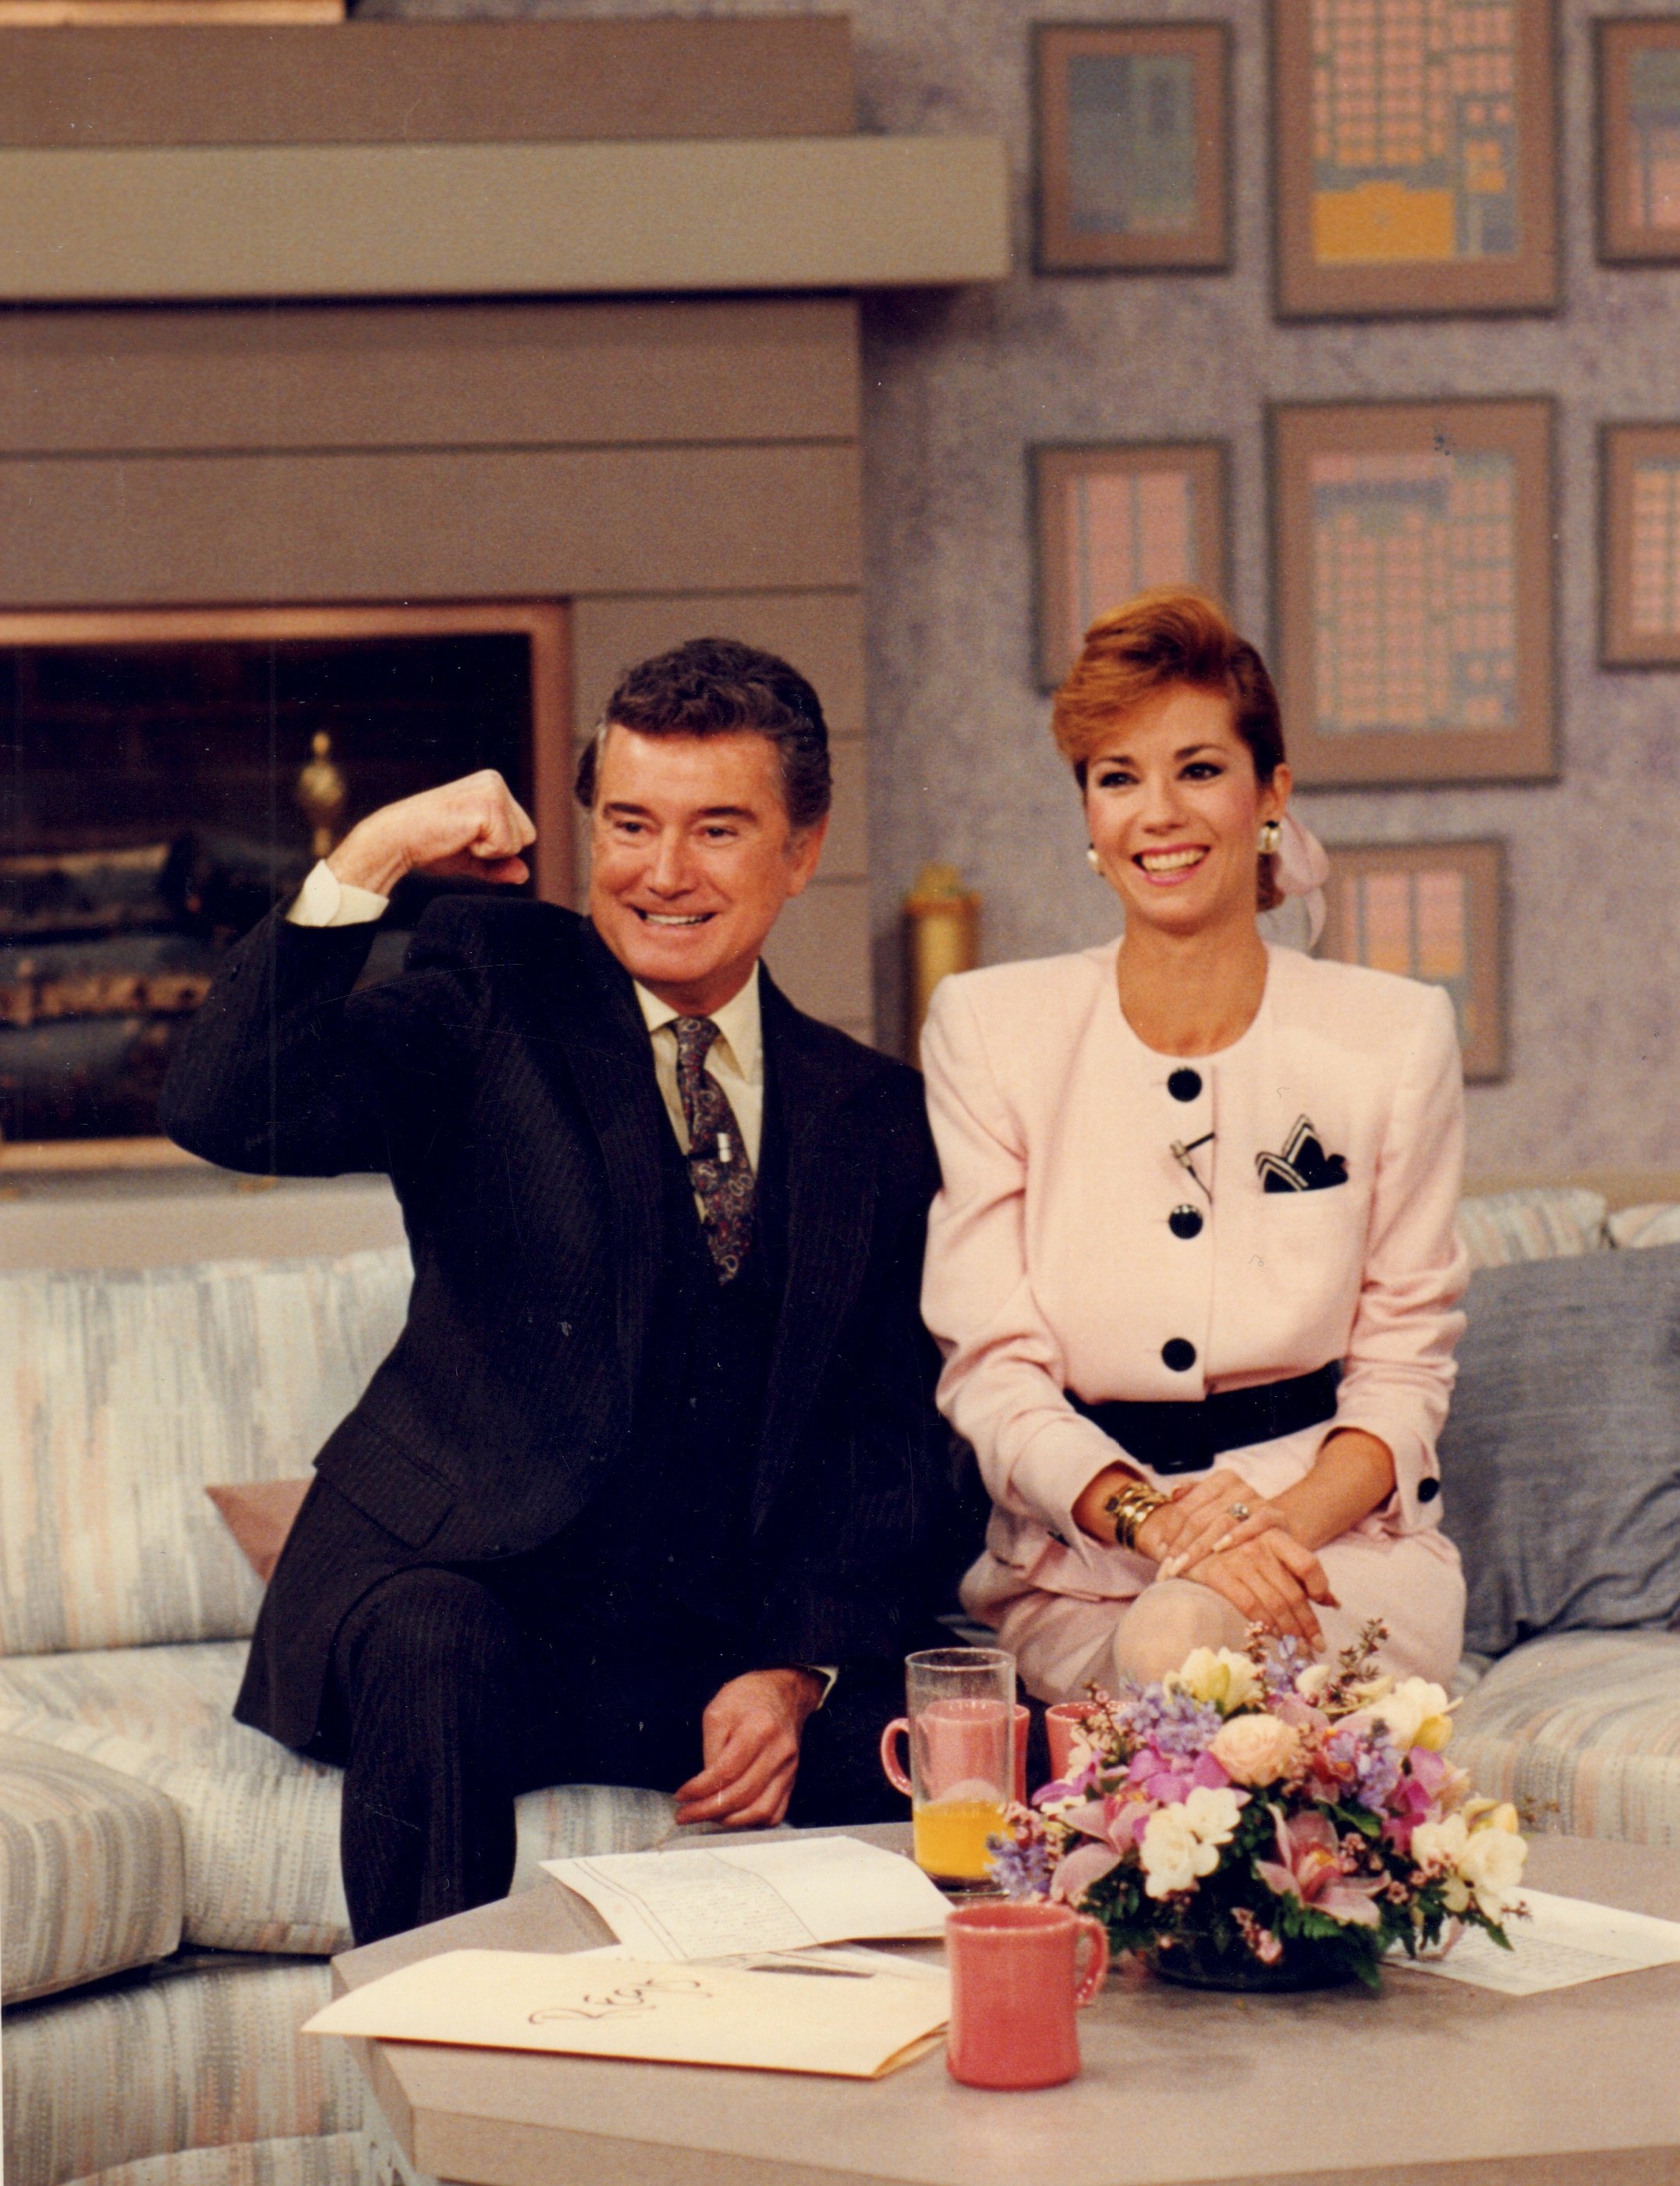 Regis Philbin and Kathie Lee Gifford on the set of "Live with Regis and Kathie Lee" on WABC television in 1988. | Photo: Getty Images